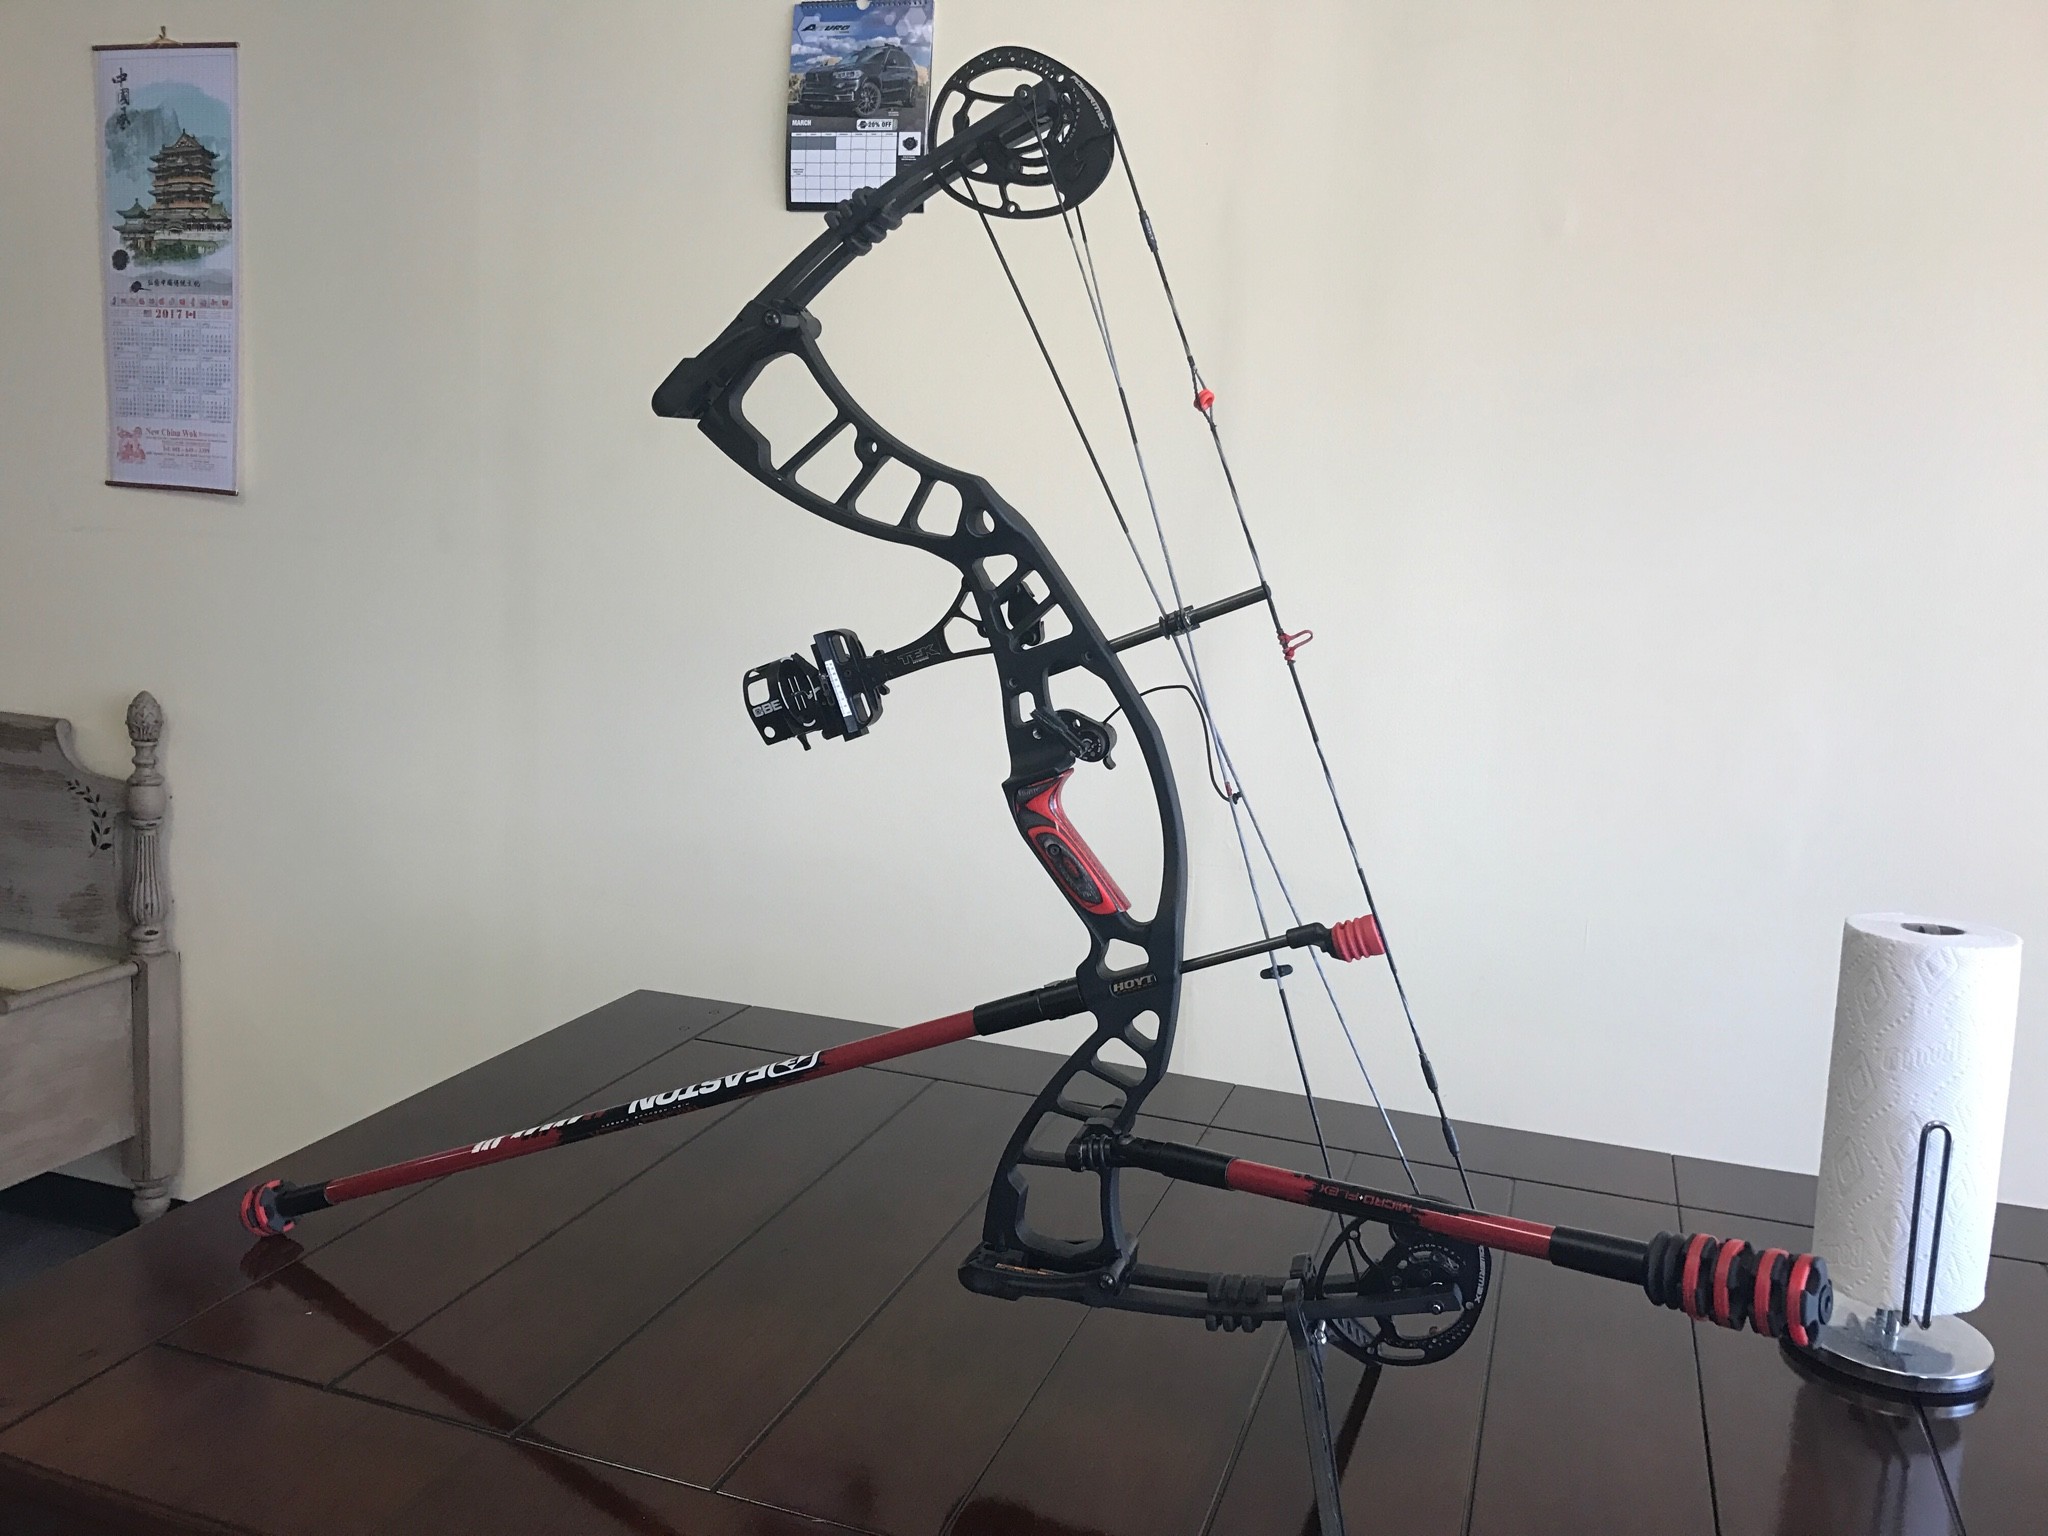 2048x1536 Here are some picks of the bow and a pic of me shooting. Got suggestions or  concerns about form please hammer away.